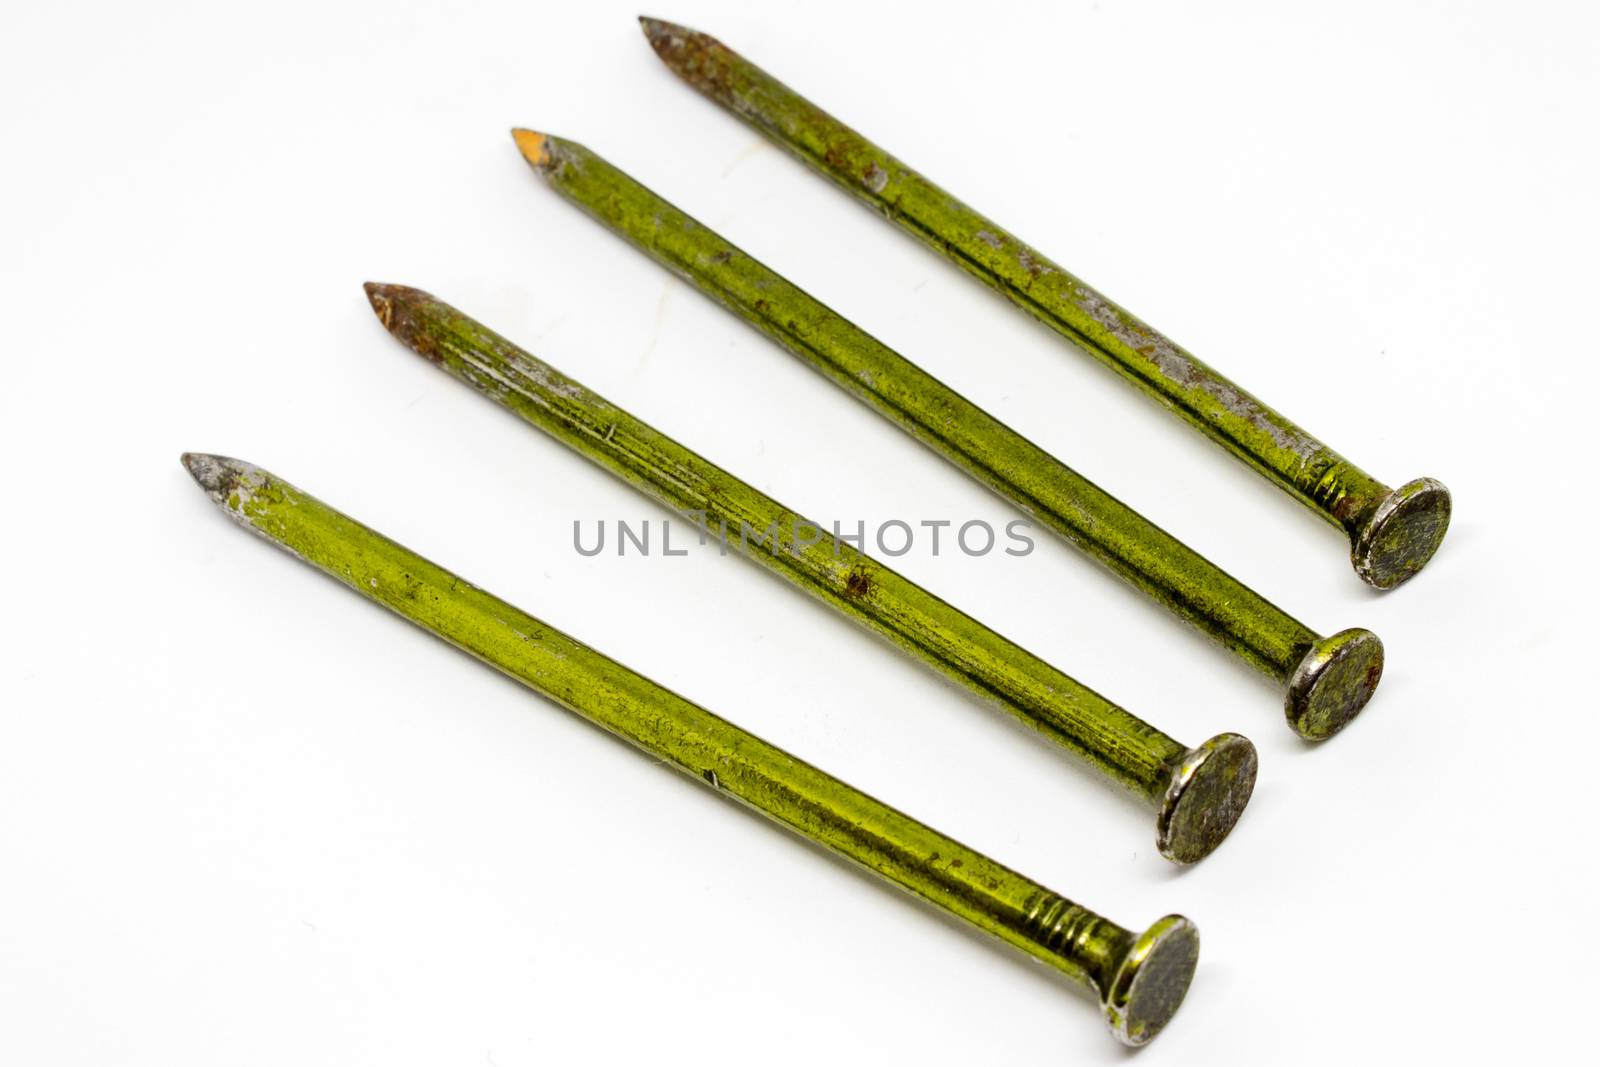 four old metal rusty nails closeup with white background. detailed product shoot.